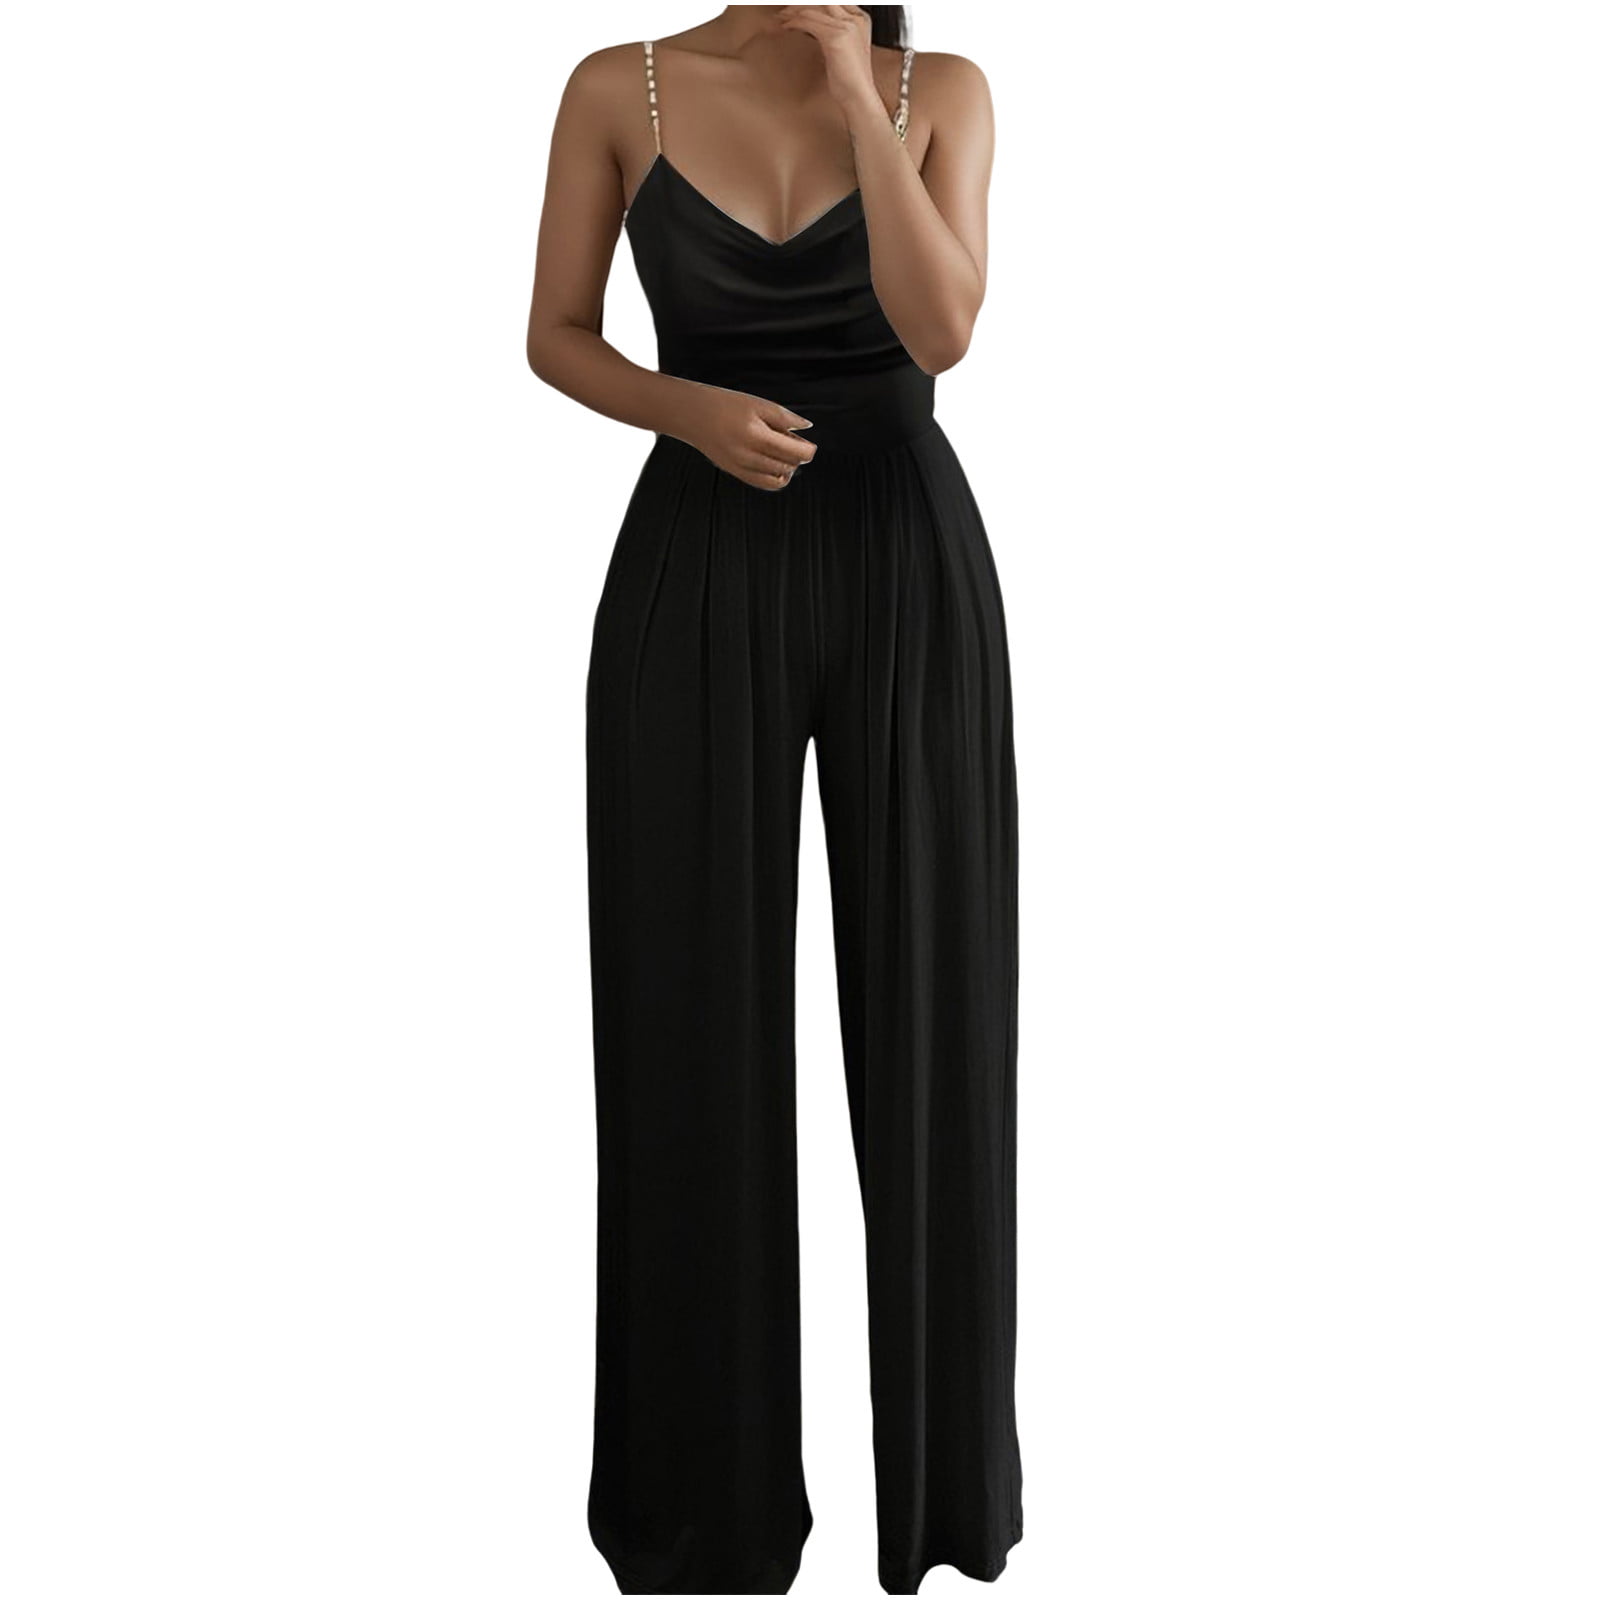 Rgdypko Jumpsuits For Women Casual Summer Jumpsuit Soild Sexy Top Sling ...